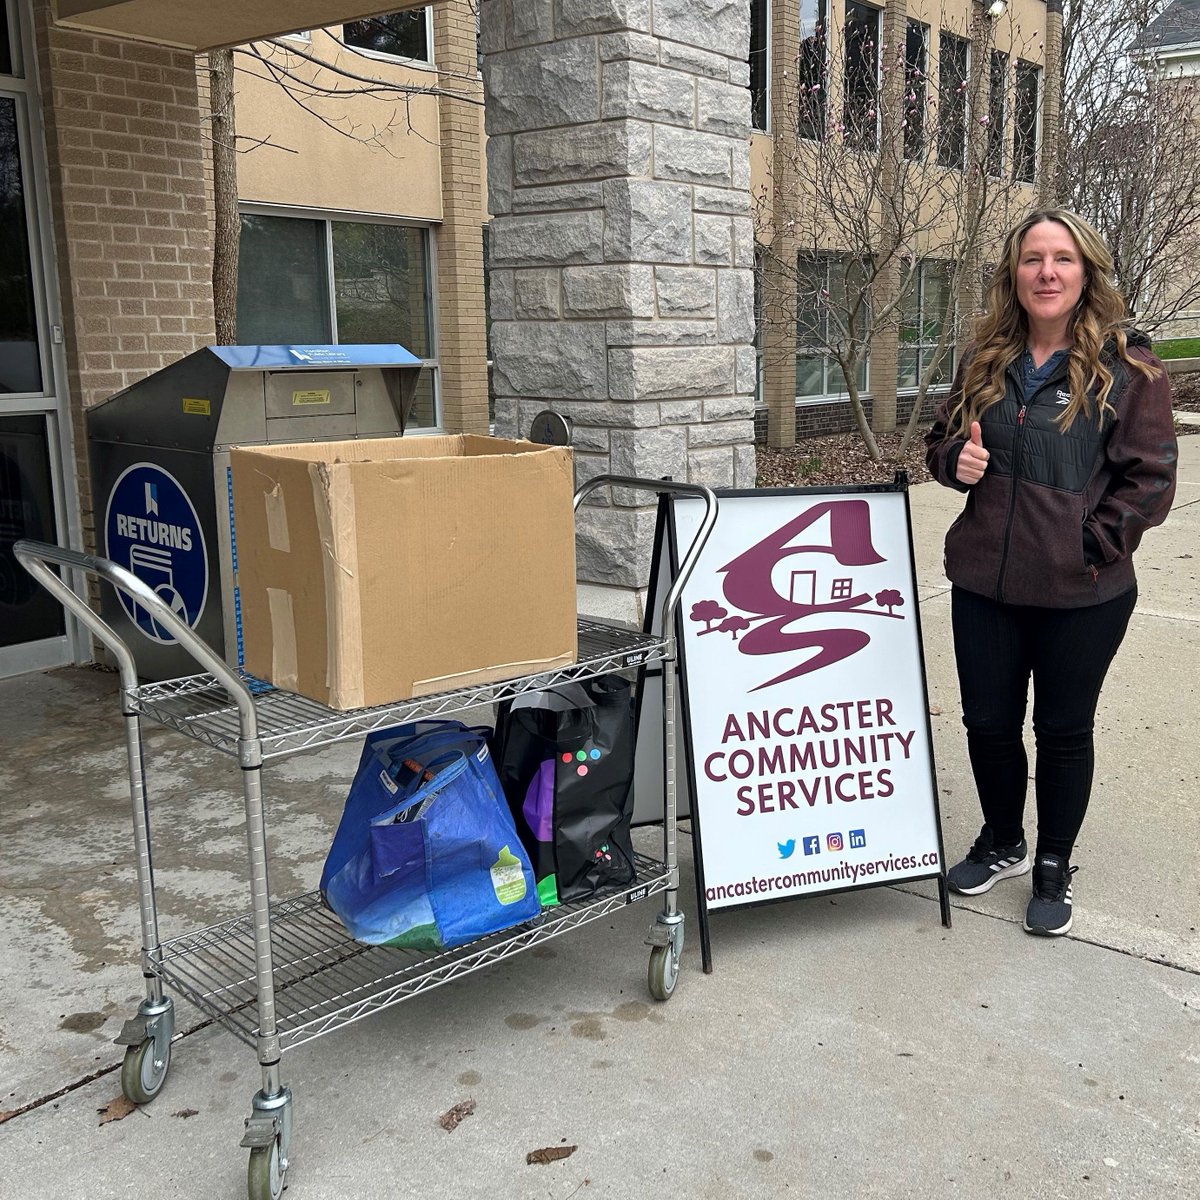 We are ending the week with a big #ThankYou to The Parent Bazaar for hosting a #FoodDrive at their Spring Sale earlier this month! 🙌 Over 68 lbs of non-perishable food was collected & dropped off last week. Thank you also to everyone who donated! You are amazing! 💕

#Ancaster